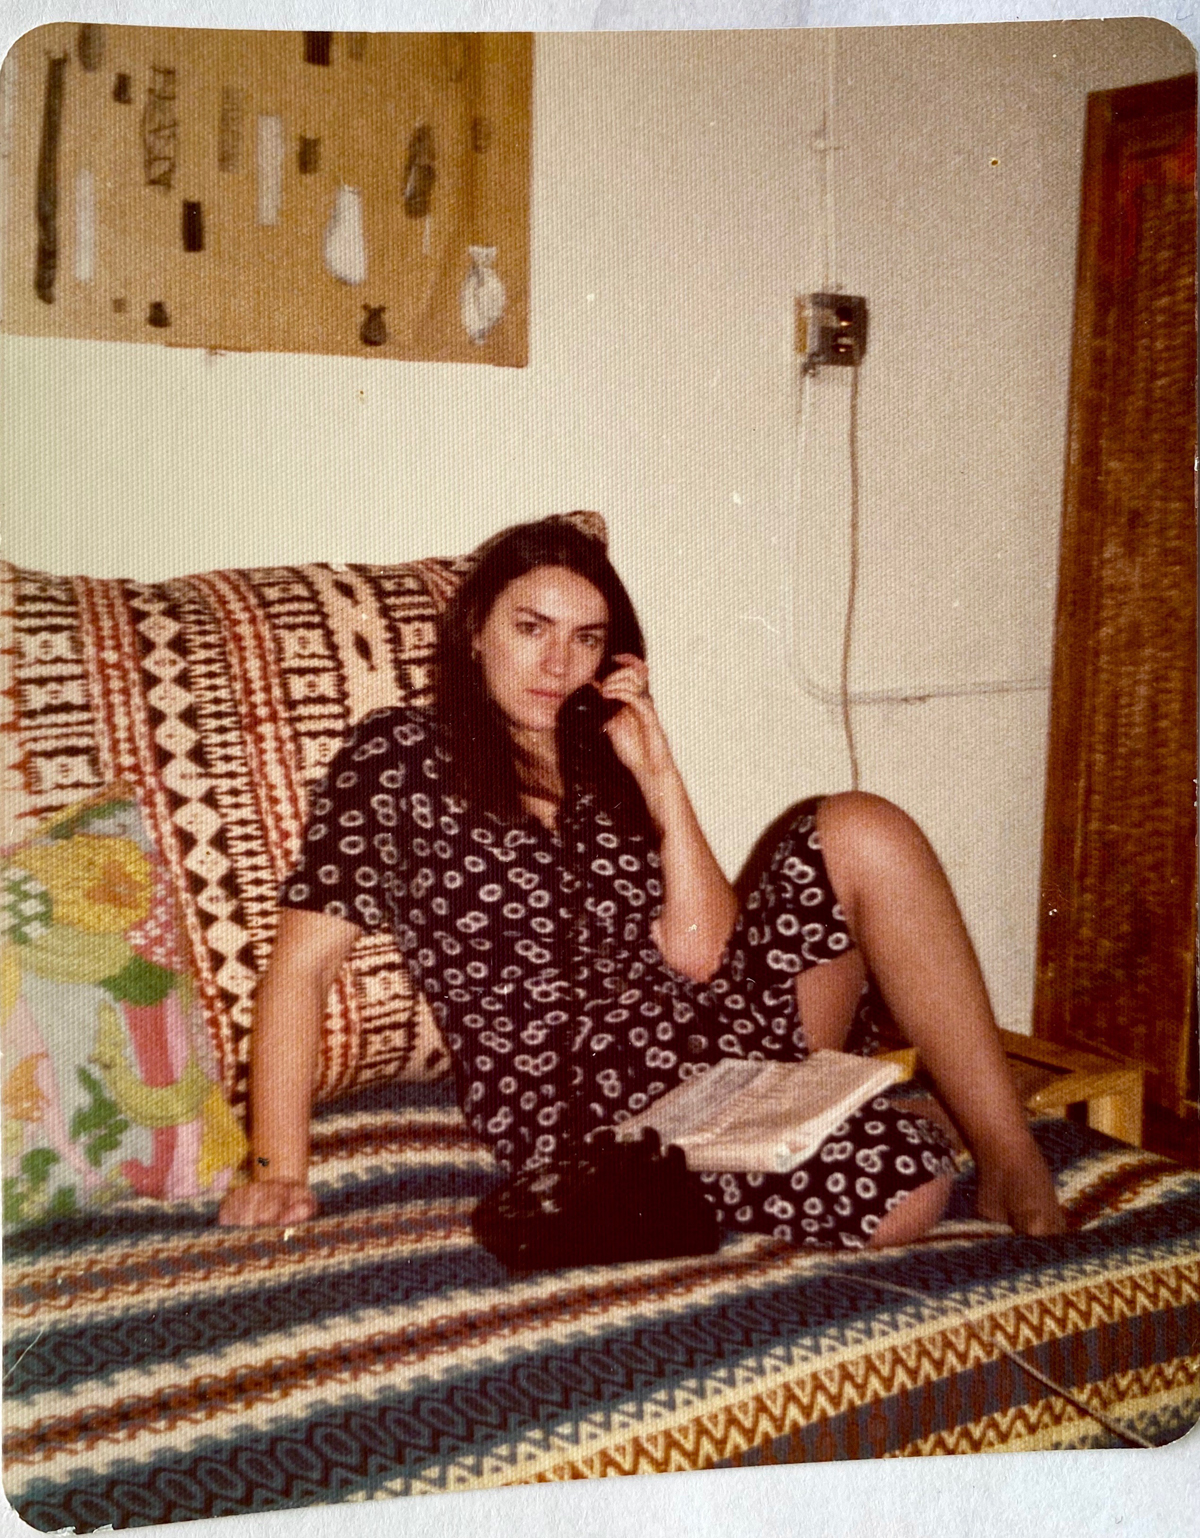 Bed/sofa. 1973. If you’re wondering, that’s a telephone I’m holding.